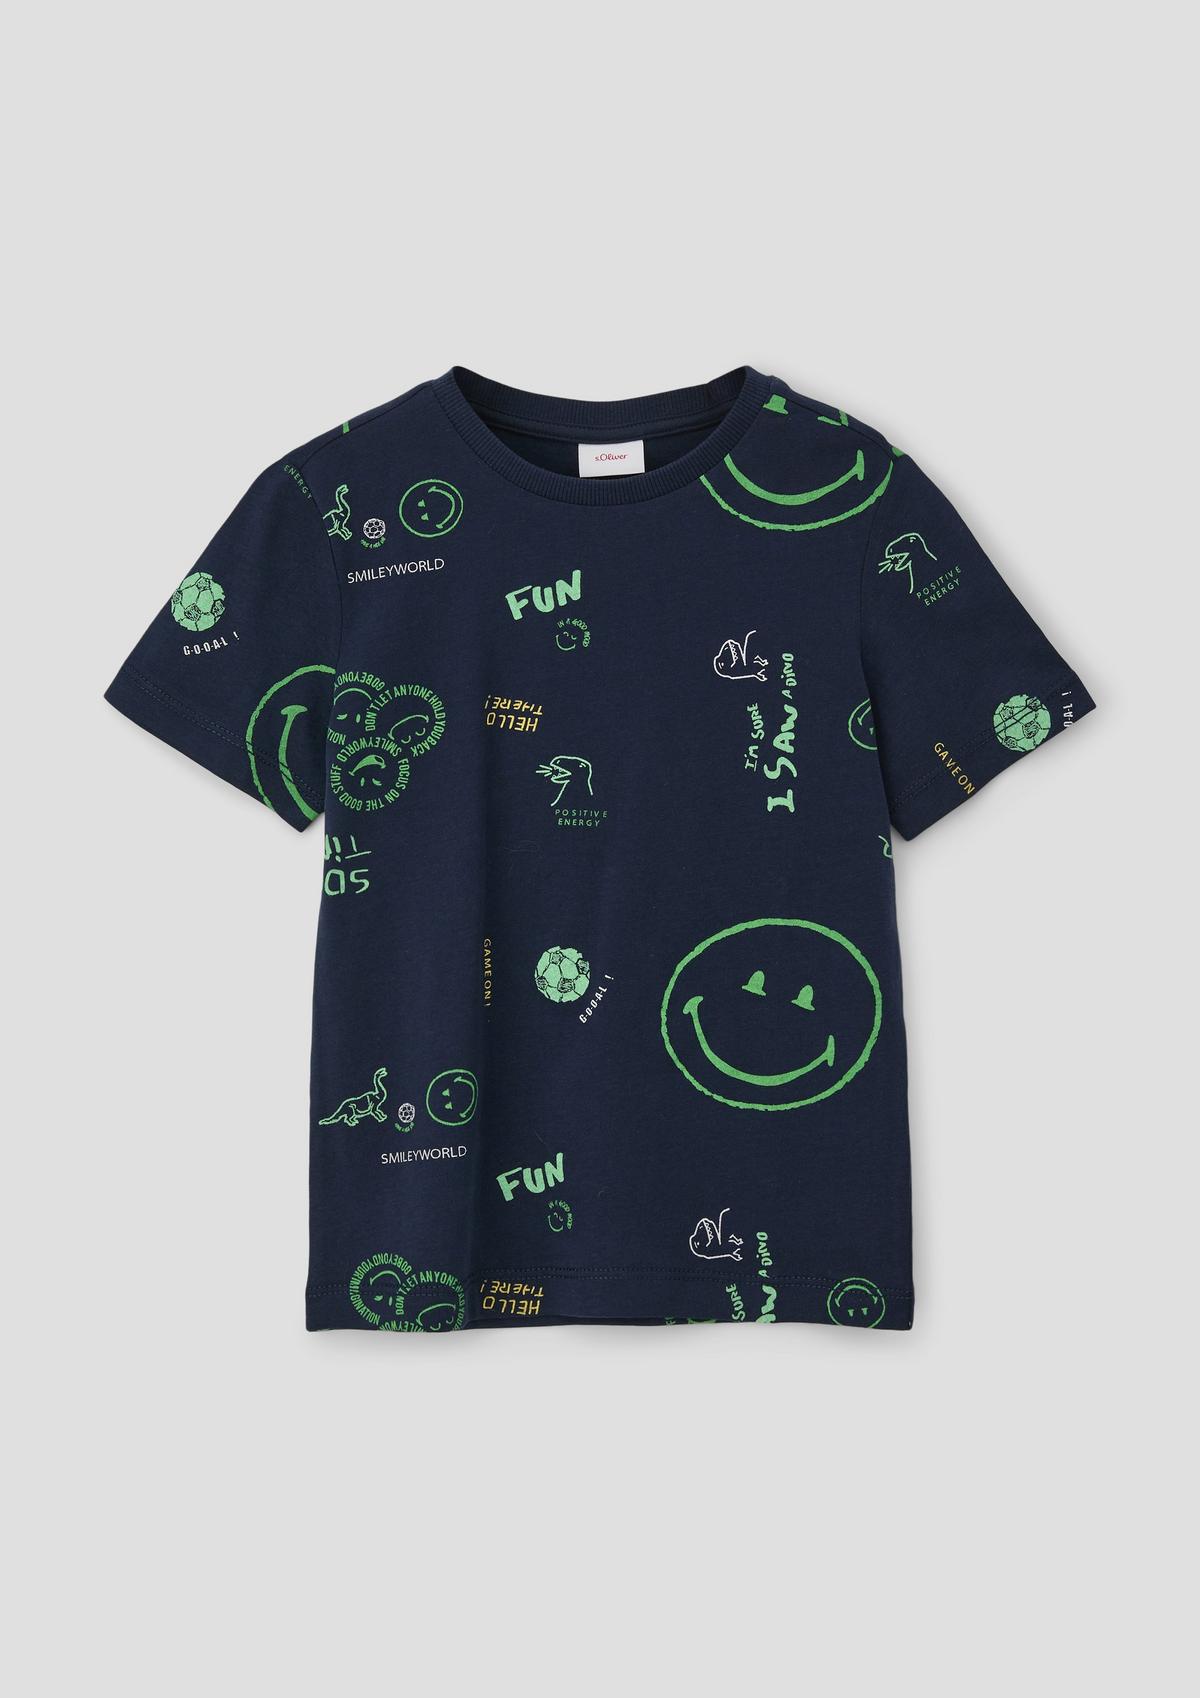 s.Oliver T-Shirt mit All-over-Smiley®-Print